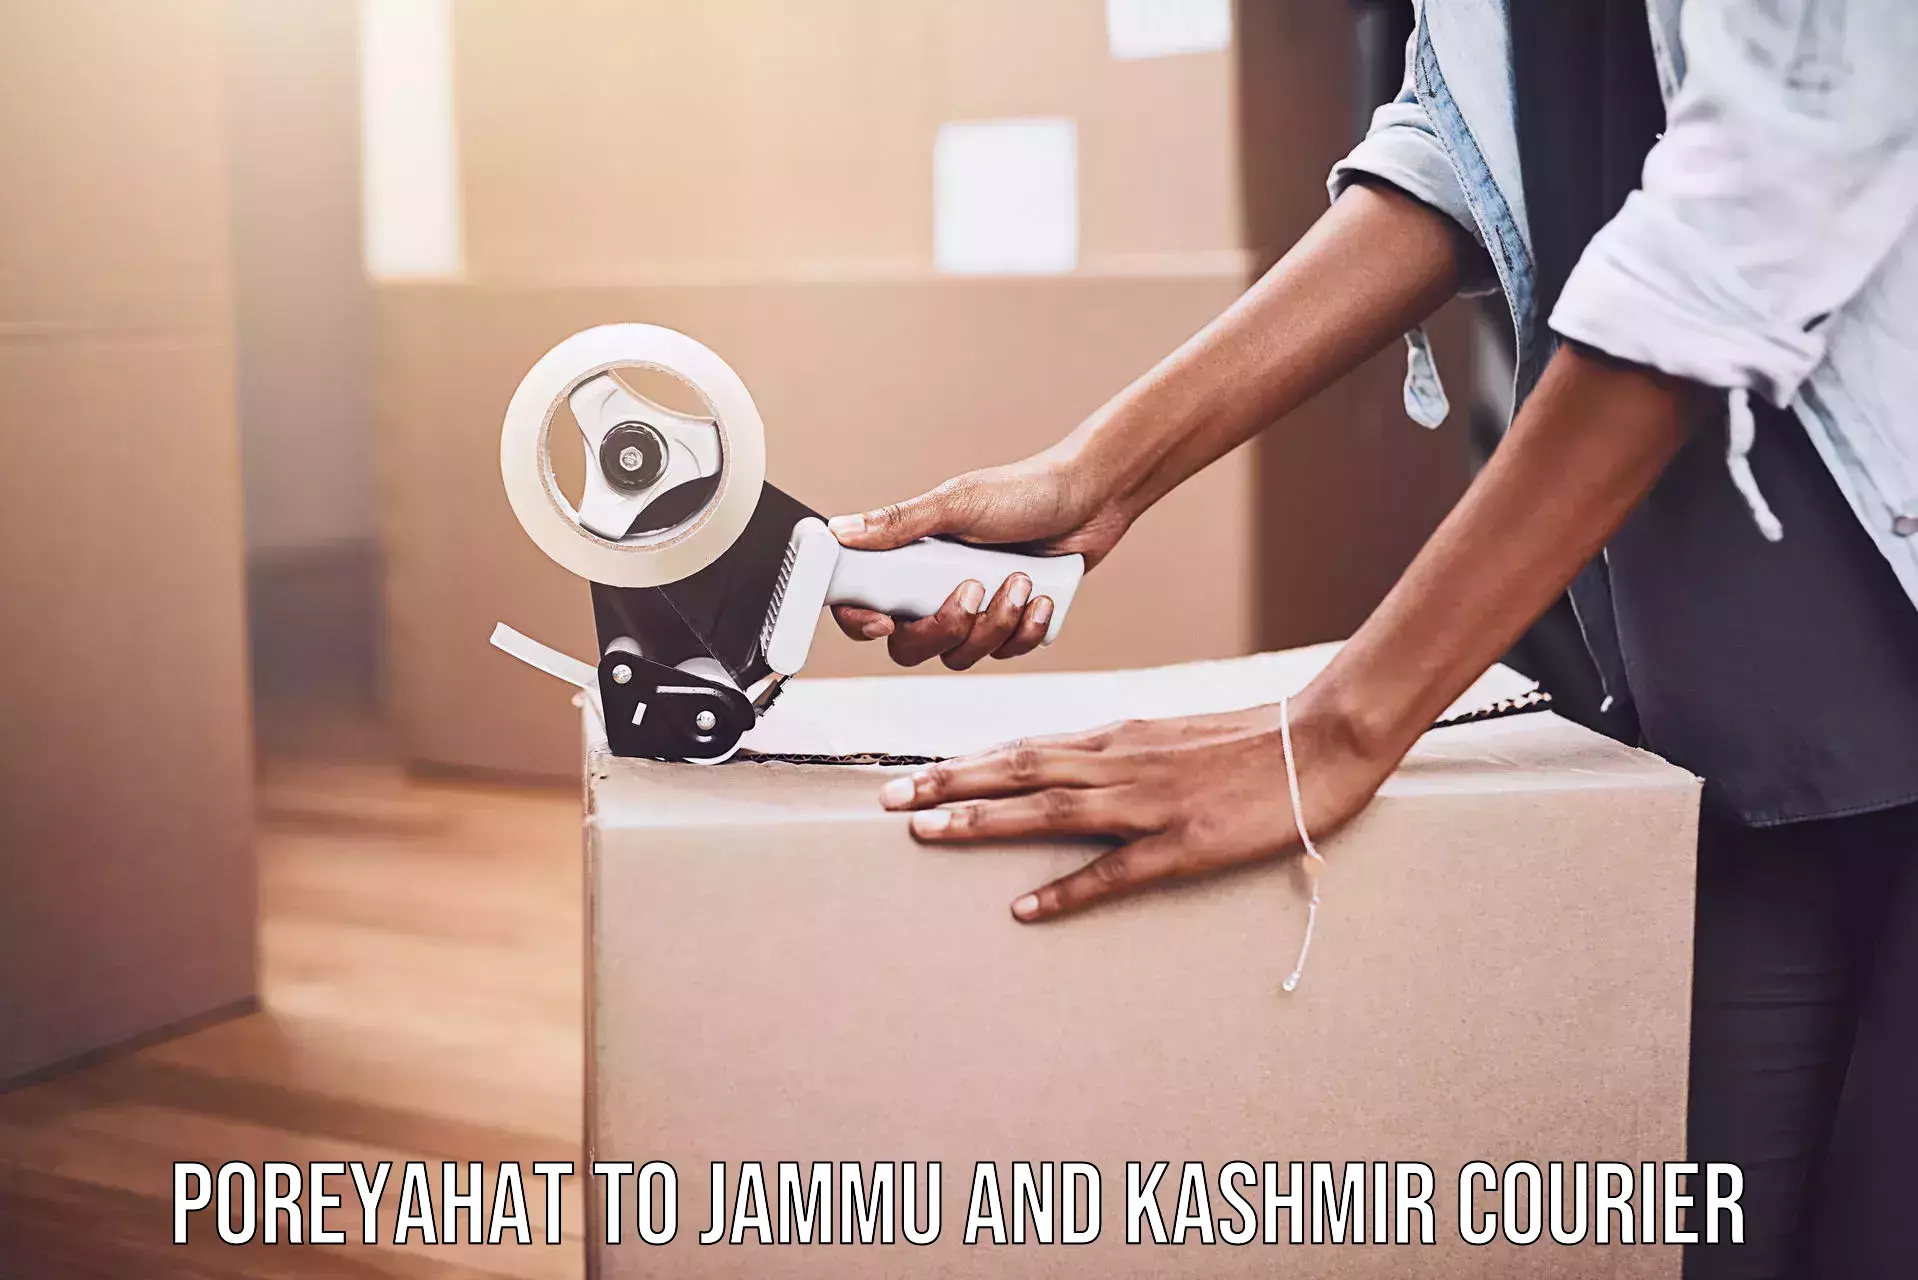 Next-day delivery options in Poreyahat to University of Jammu